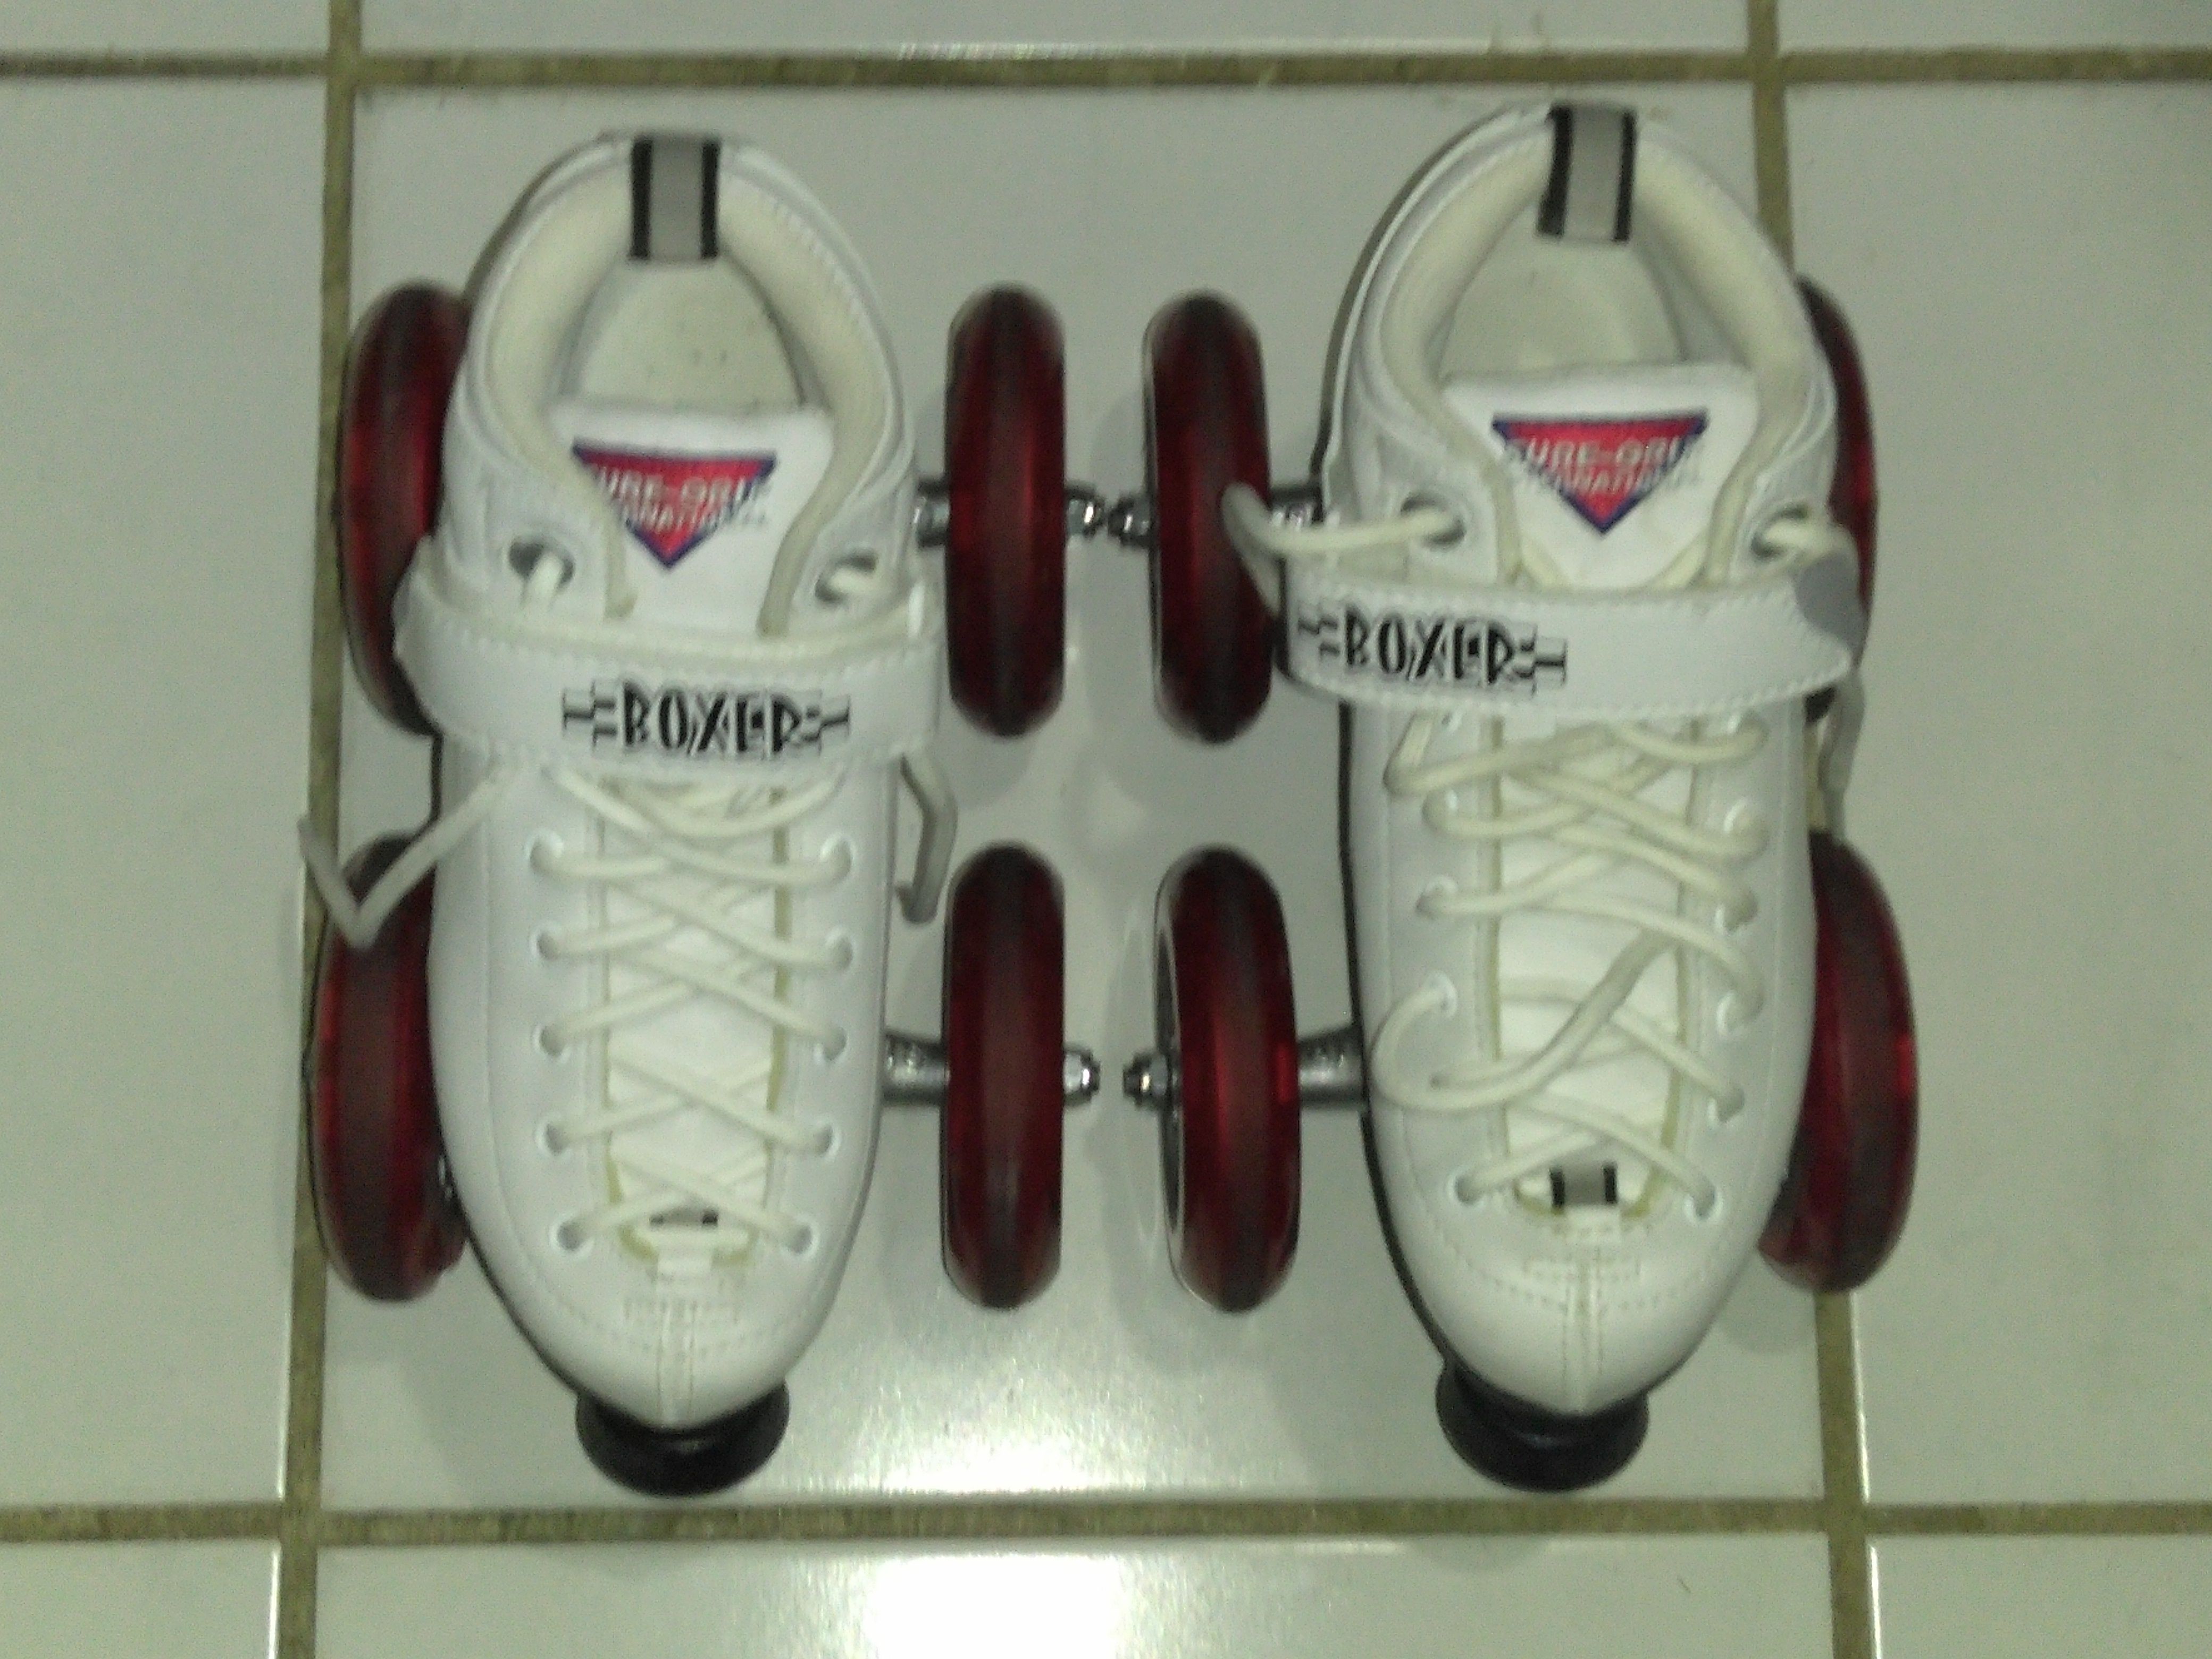 Size 4 Boxer skates with suregrip plates and oversized wheels